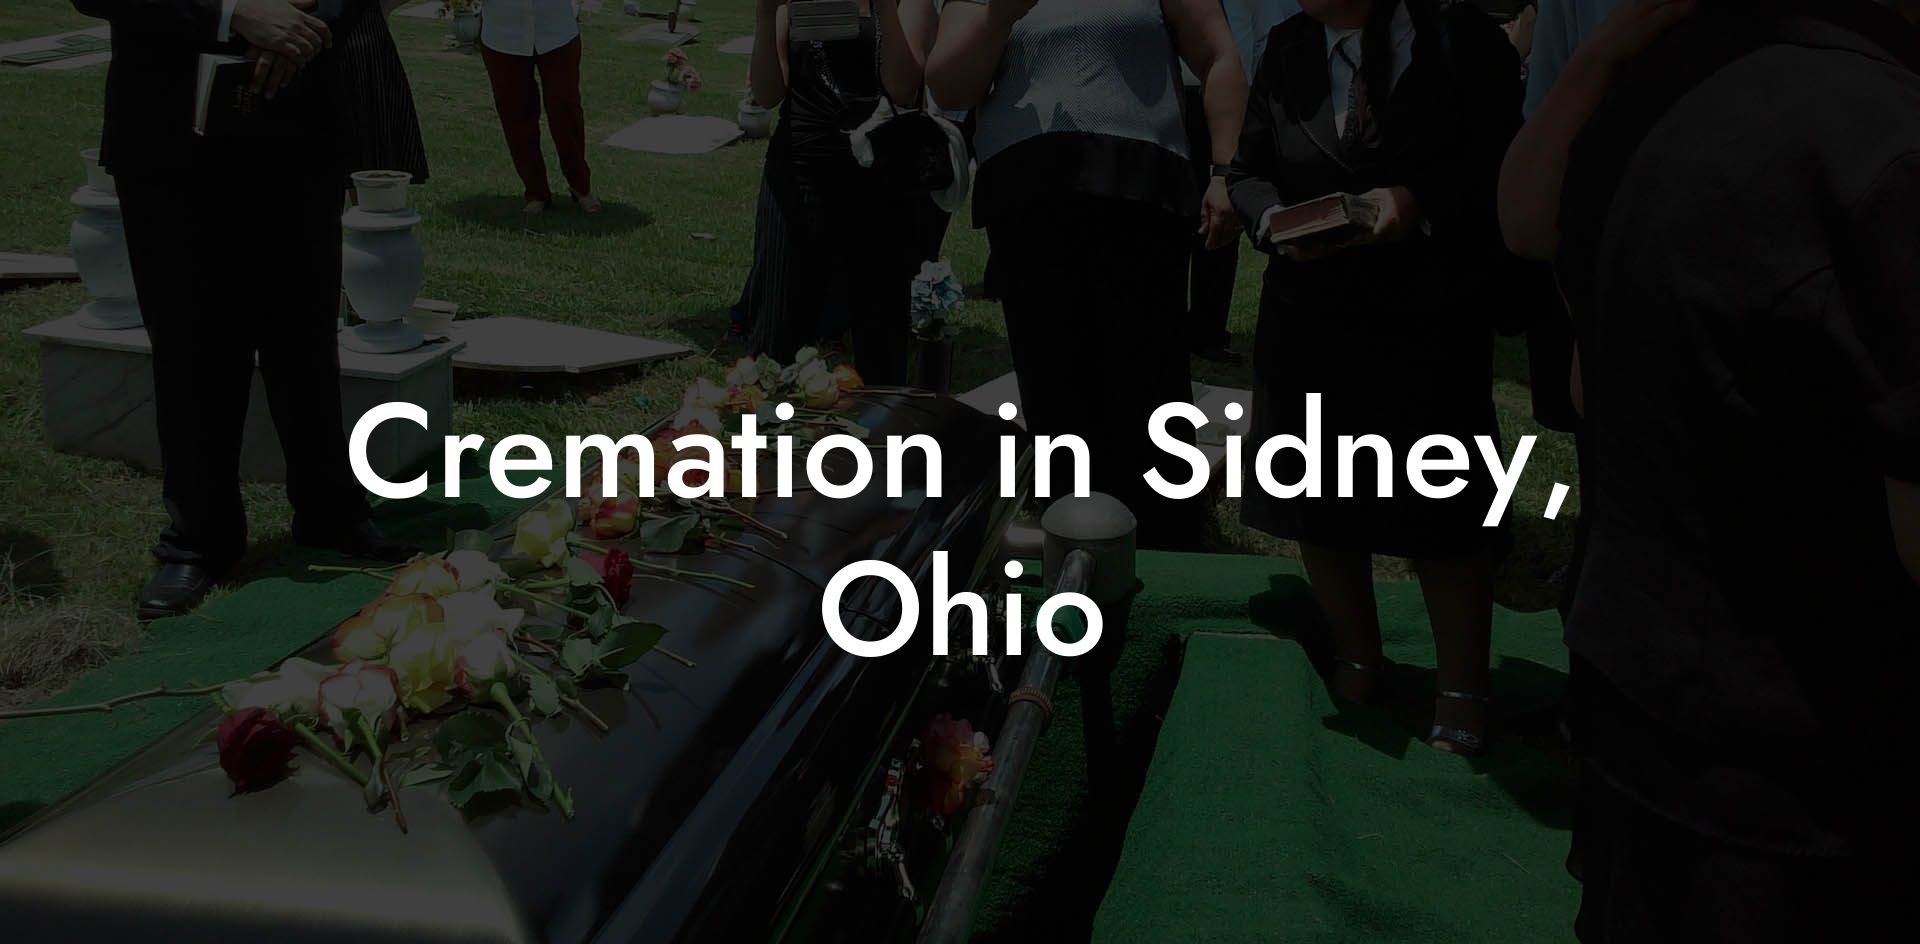 Cremation in Sidney, Ohio